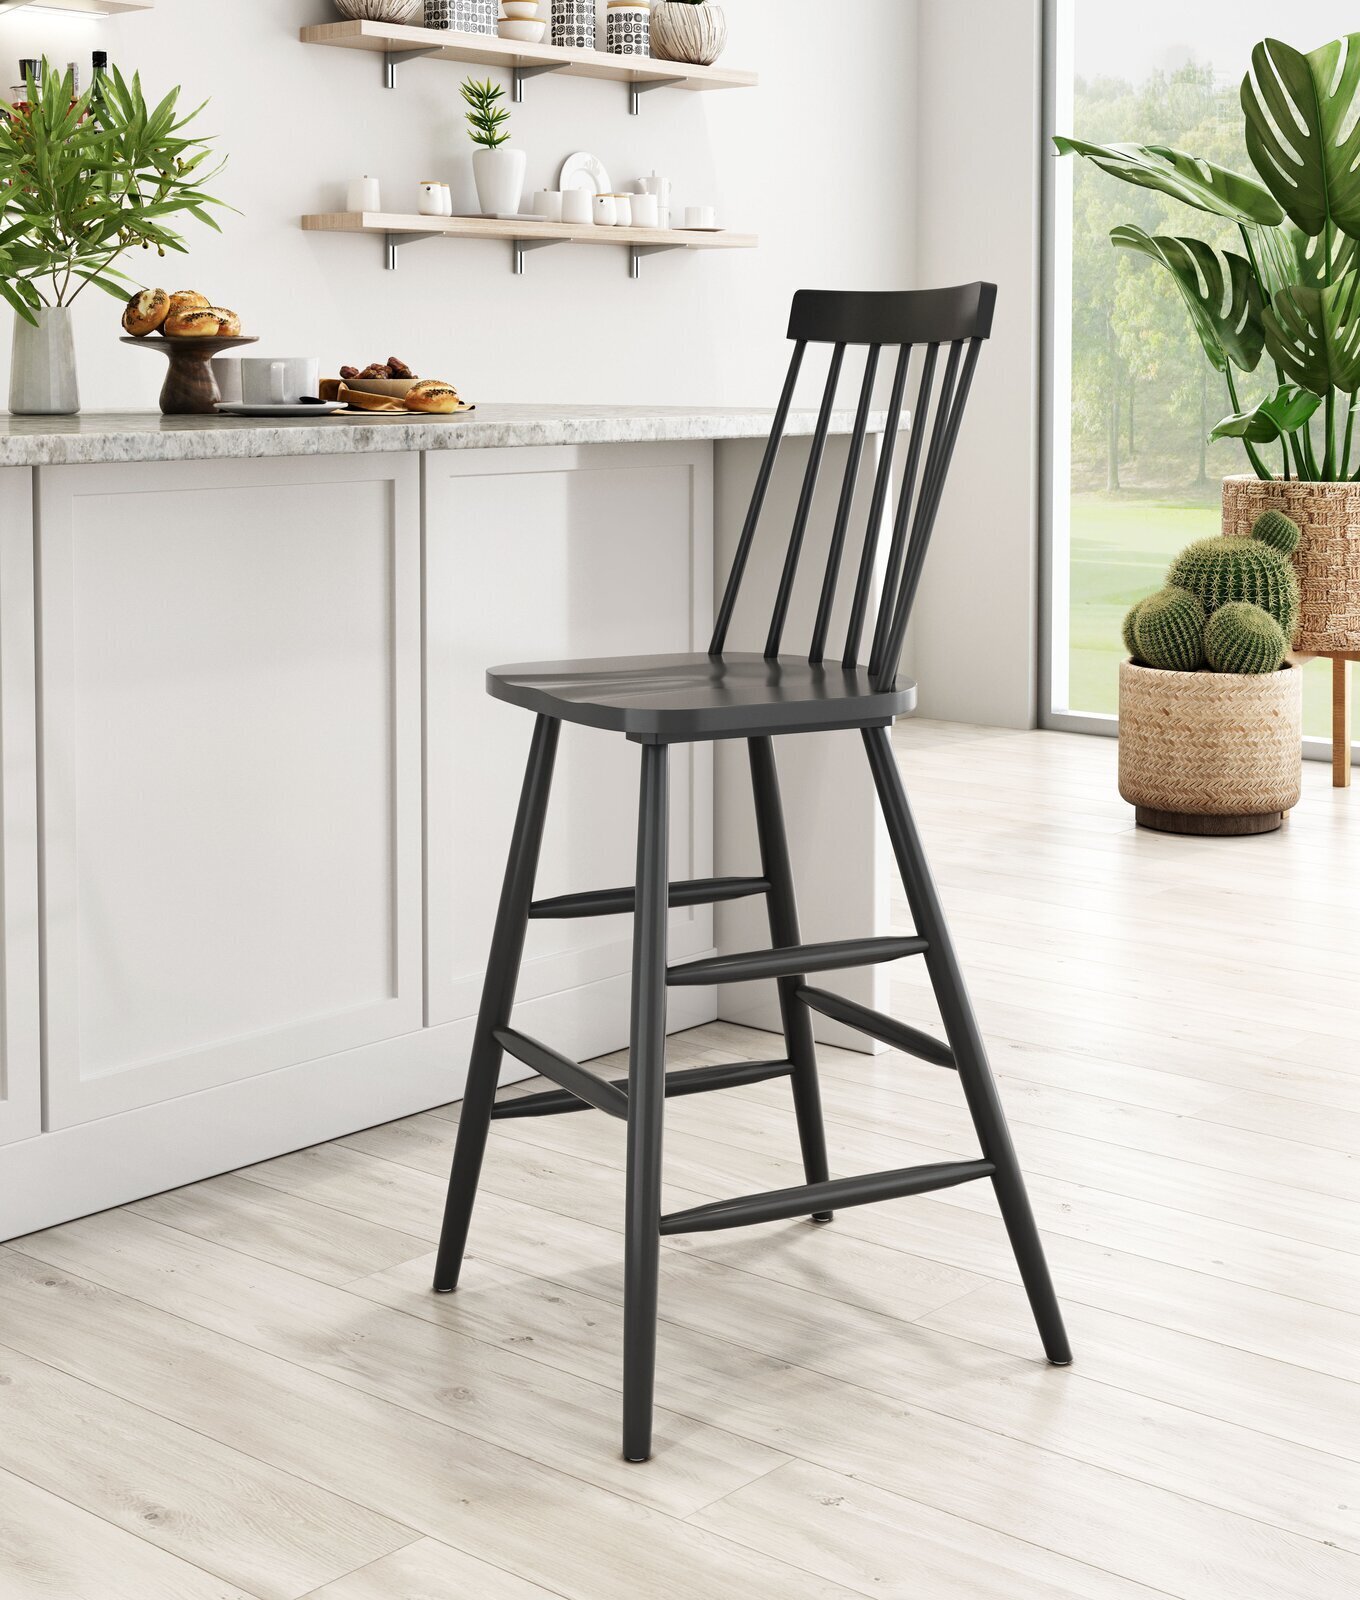 The Home Garden Store Windsor Leather Bar Stools Set Of 2 Chairs Breakfast Dining Stools For Kitchen Island Counter Adjustable Swivel Gas Lift 360° Swivel 